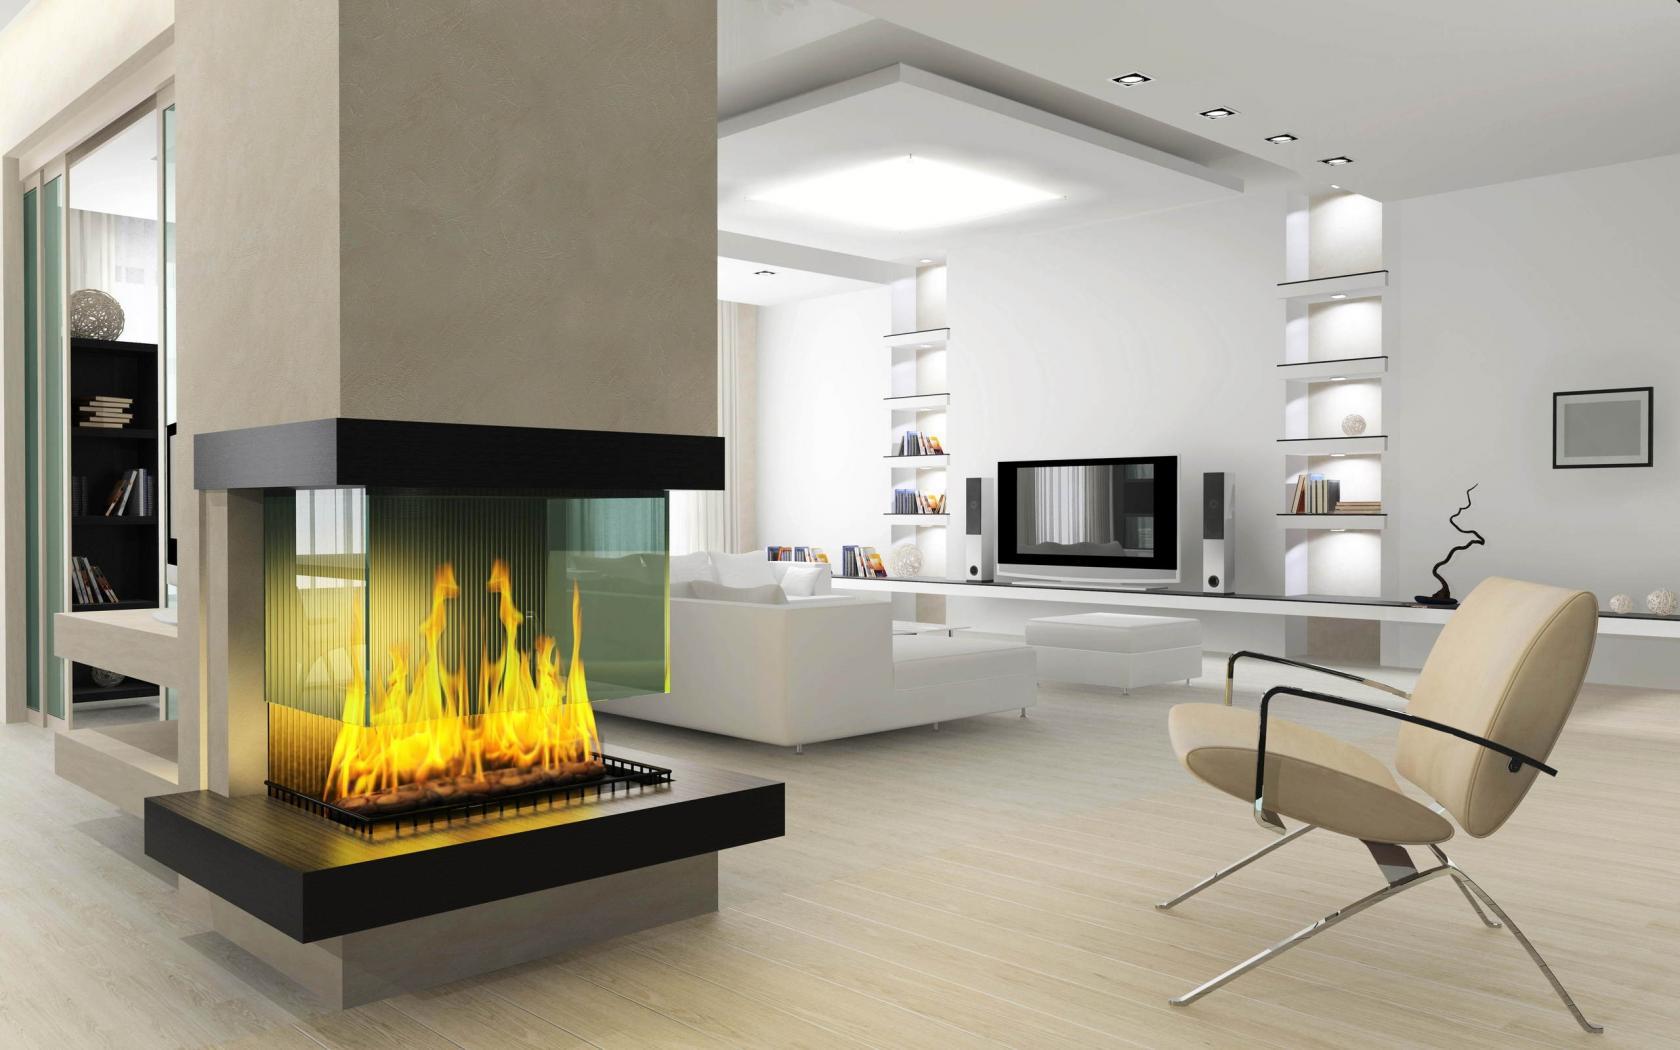 Ways to Make Fireplaces the Star of Your Home Interior